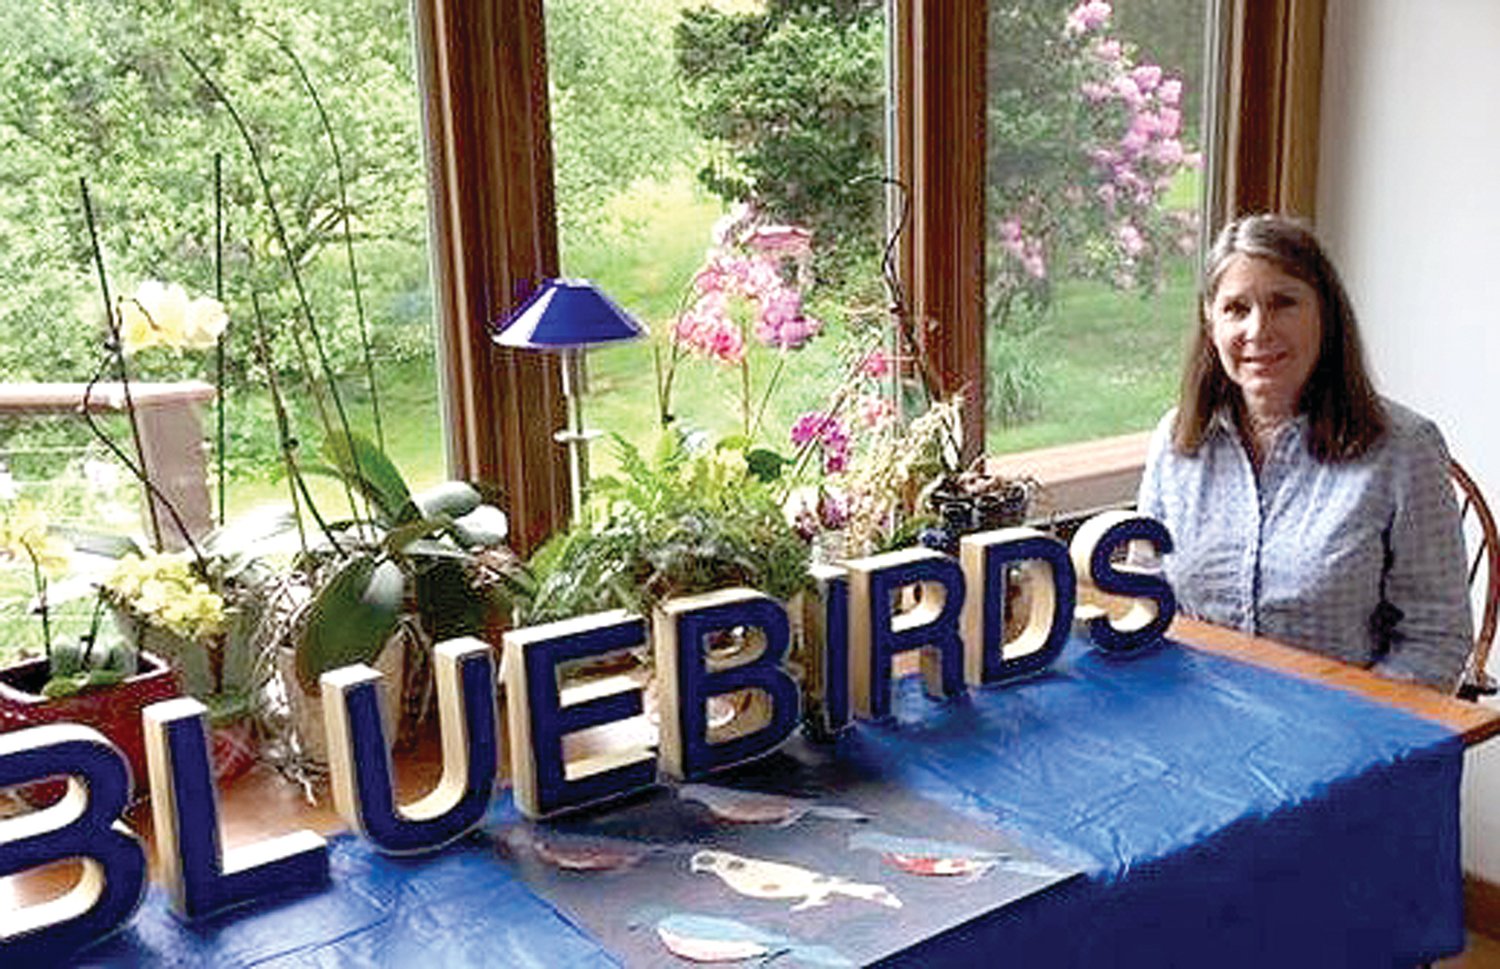 Johanna Chehi is fascinated by bluebirds, and checks their nesting boxes from the wide windows in her Durham home. Photograph by Kathryn Finegan Clark.